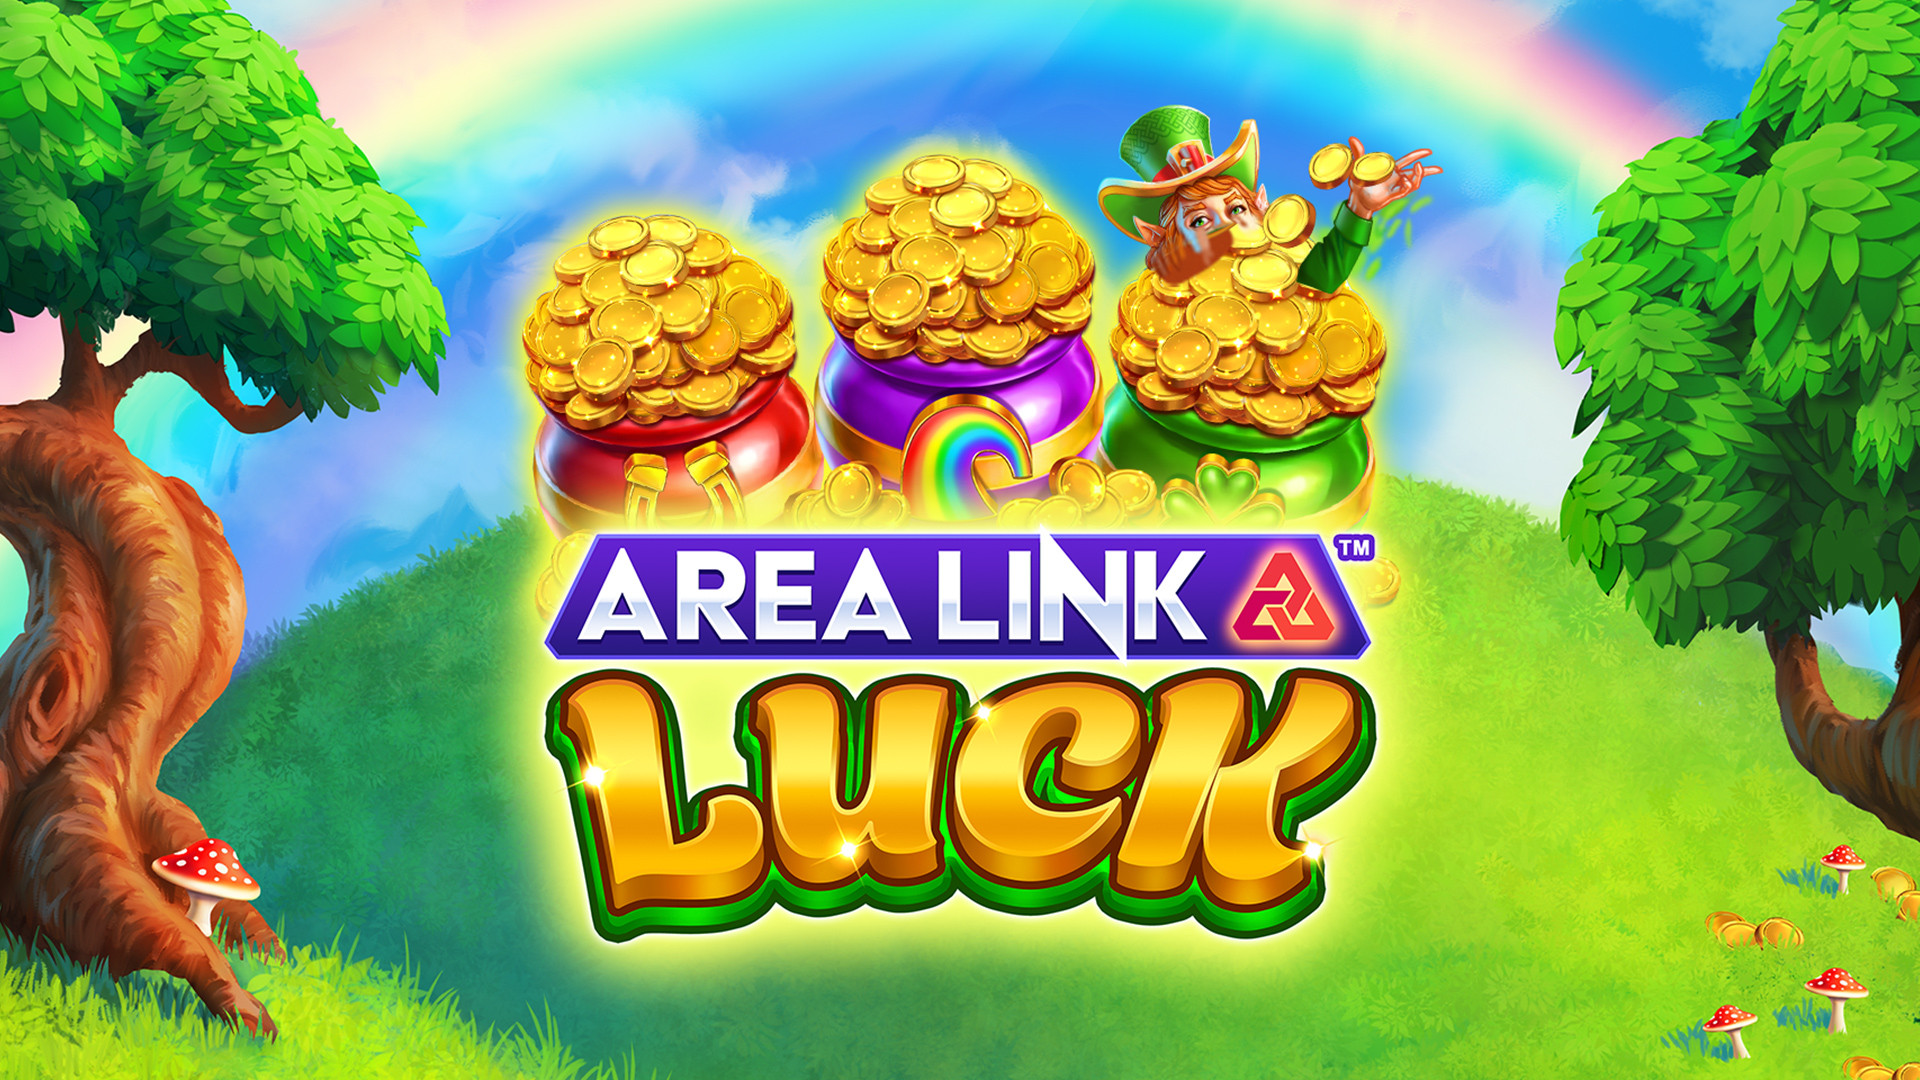 Area Link Luck